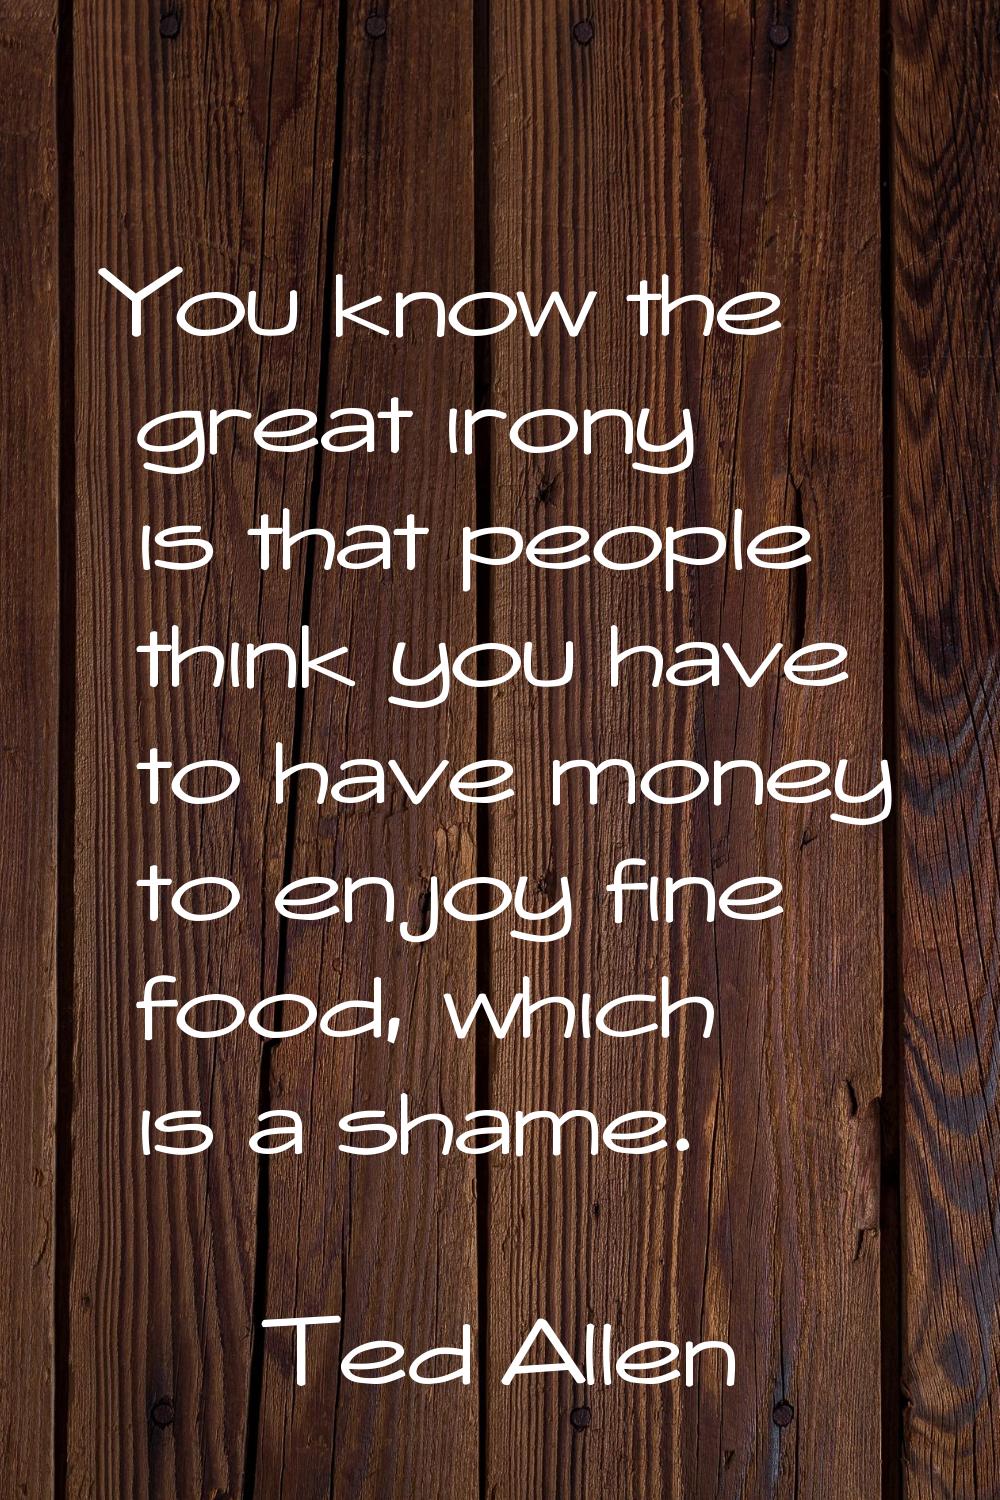 You know the great irony is that people think you have to have money to enjoy fine food, which is a